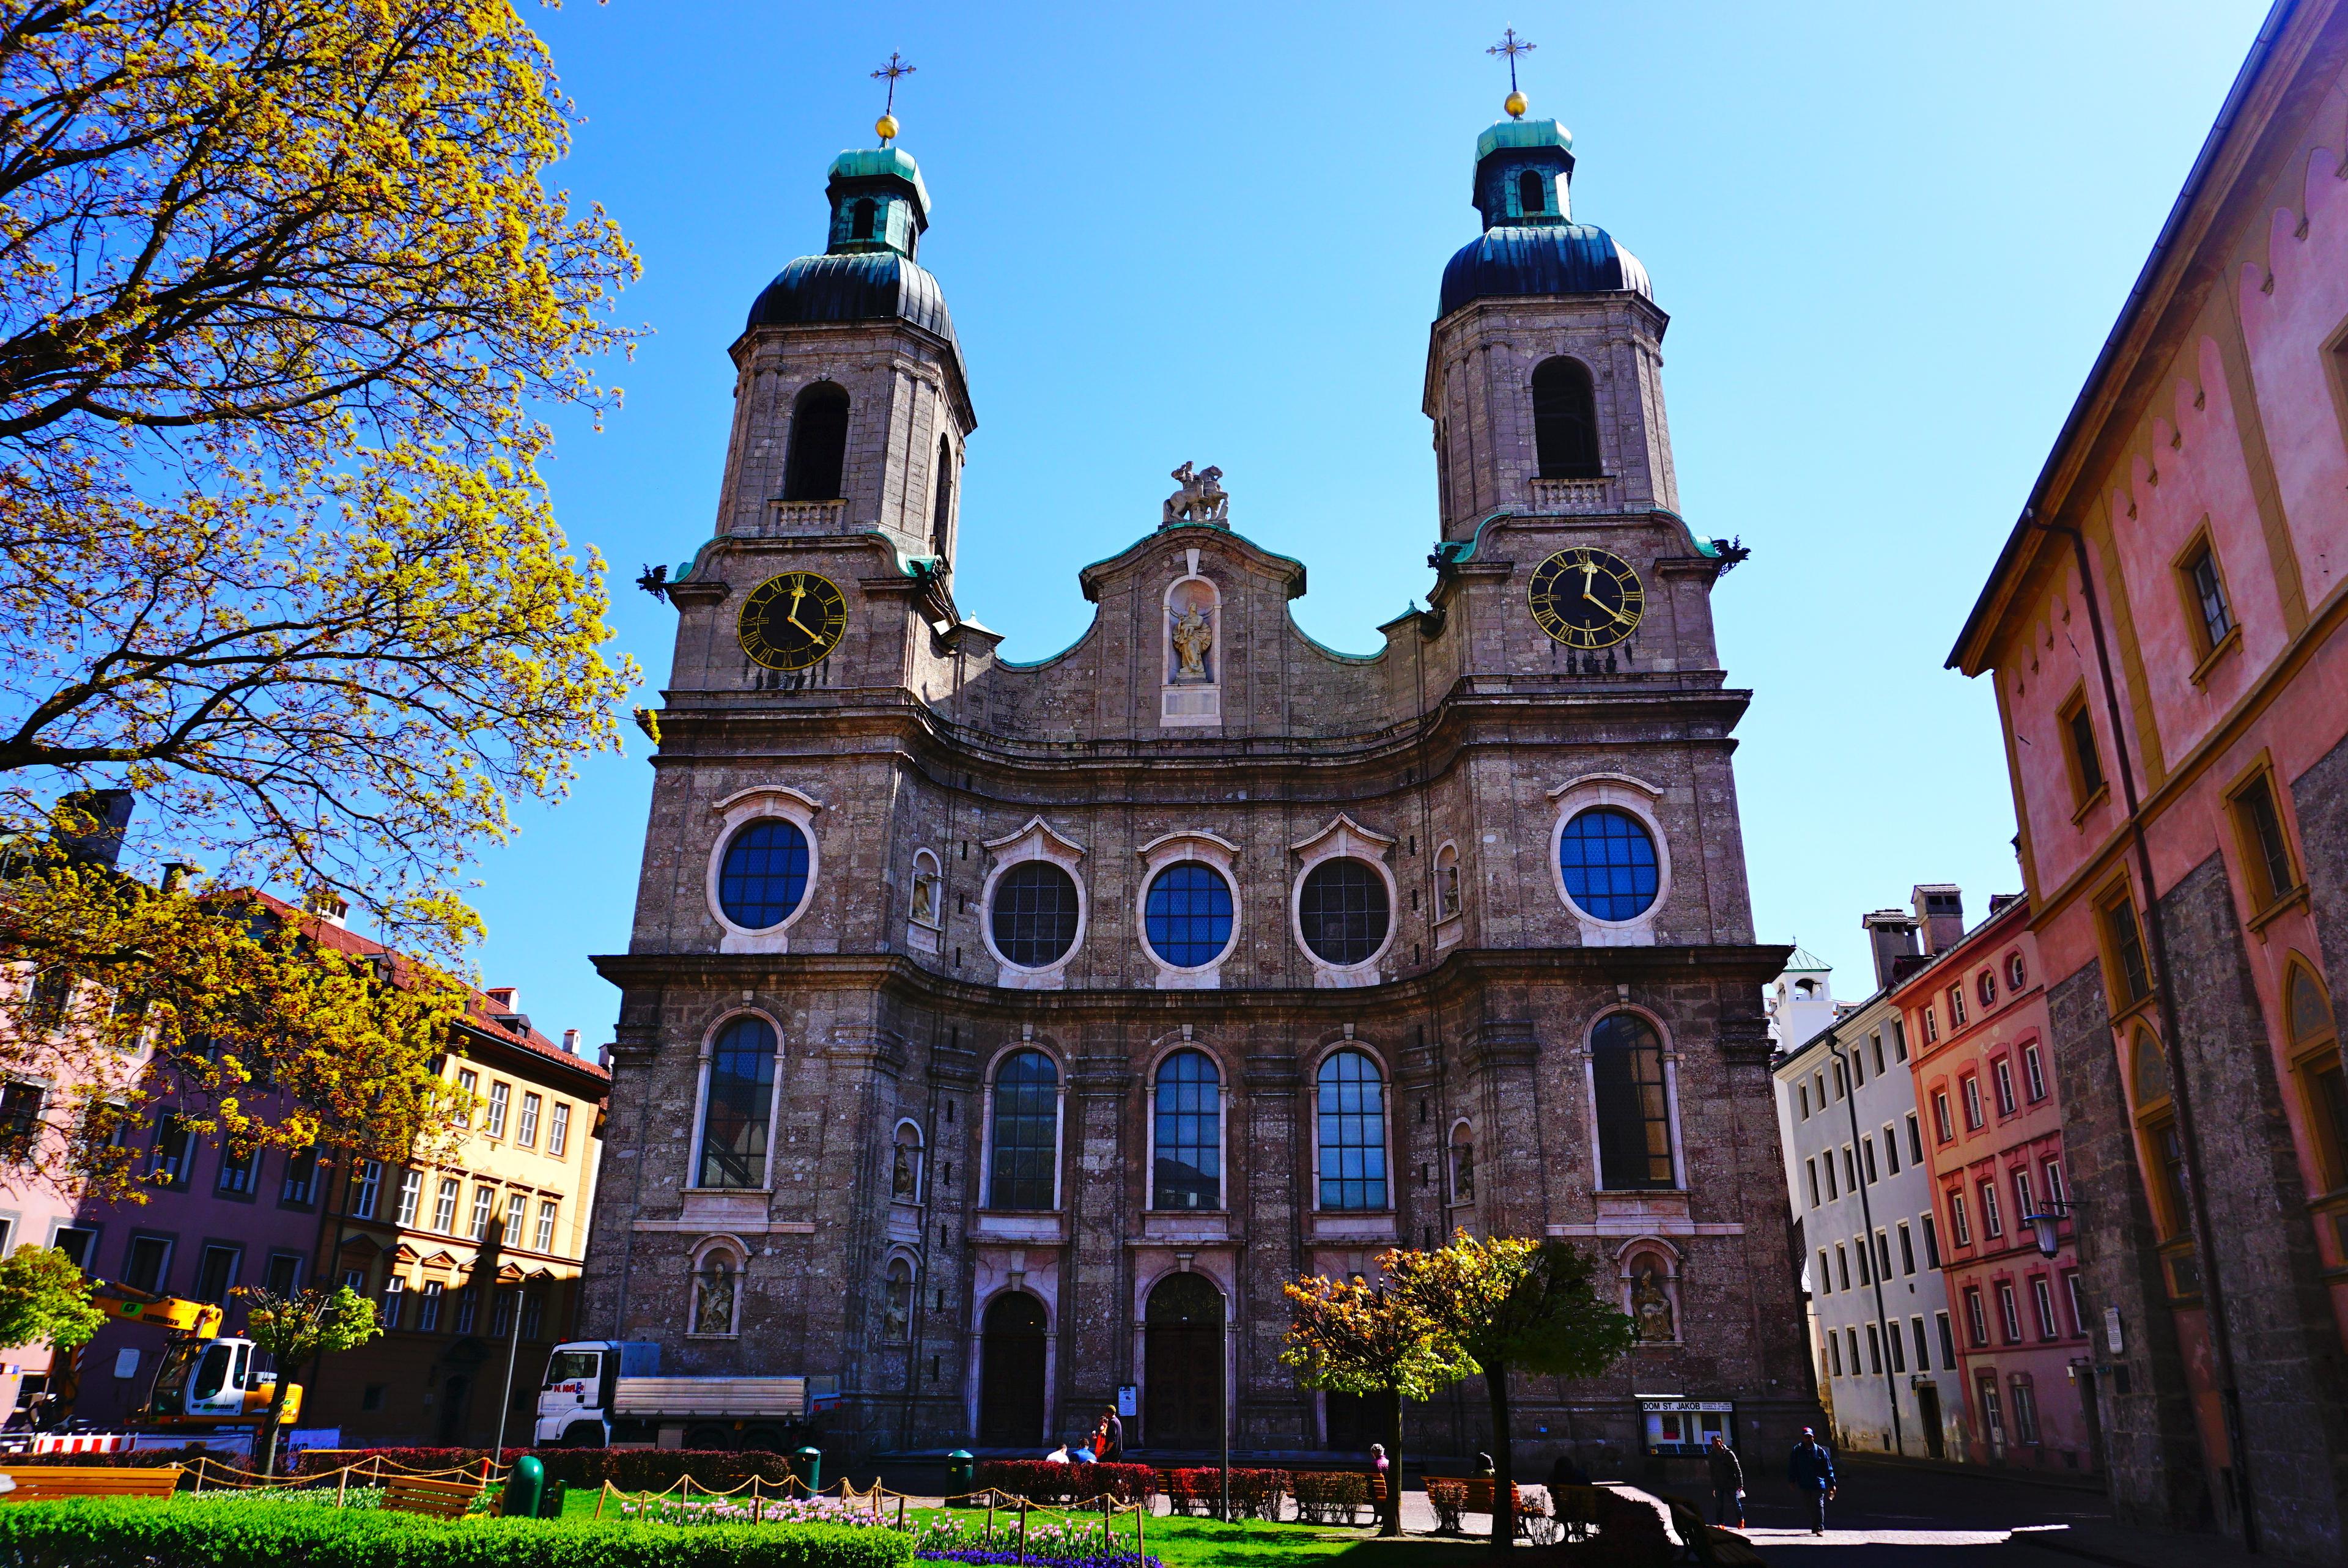 Cover image of this place Domplatz Innsbruck